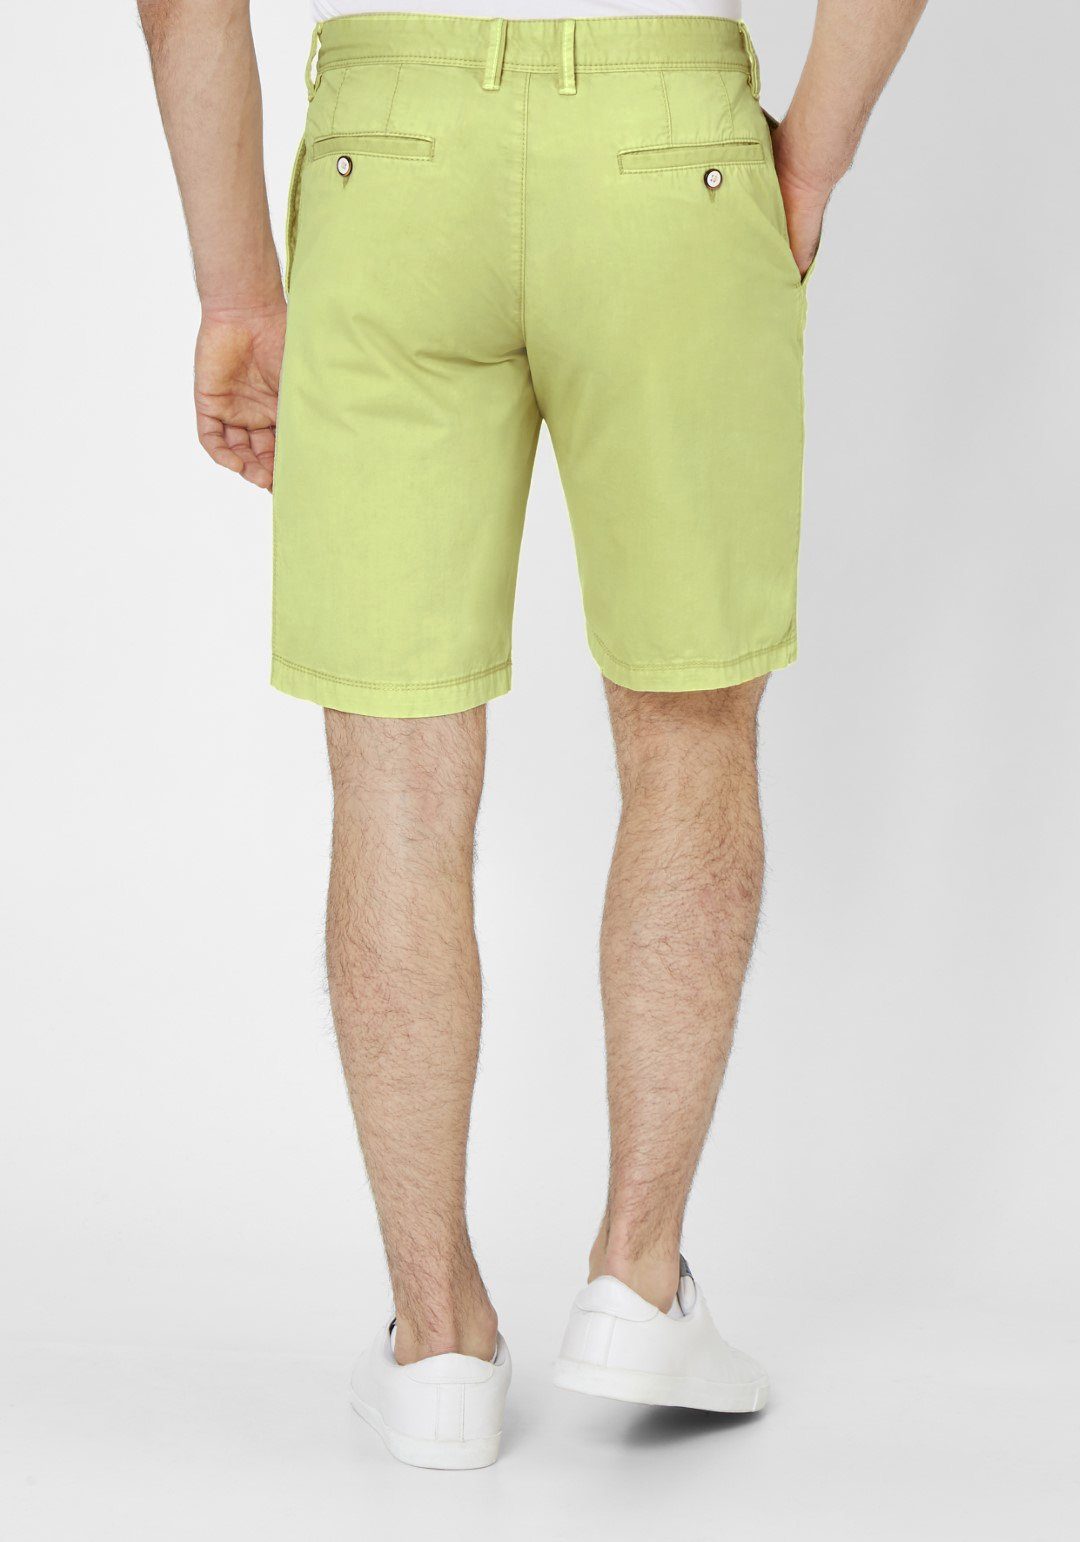 Redpoint Chinoshorts Surray Moderne Edition Bermudas - Chino 16 Shades Lime